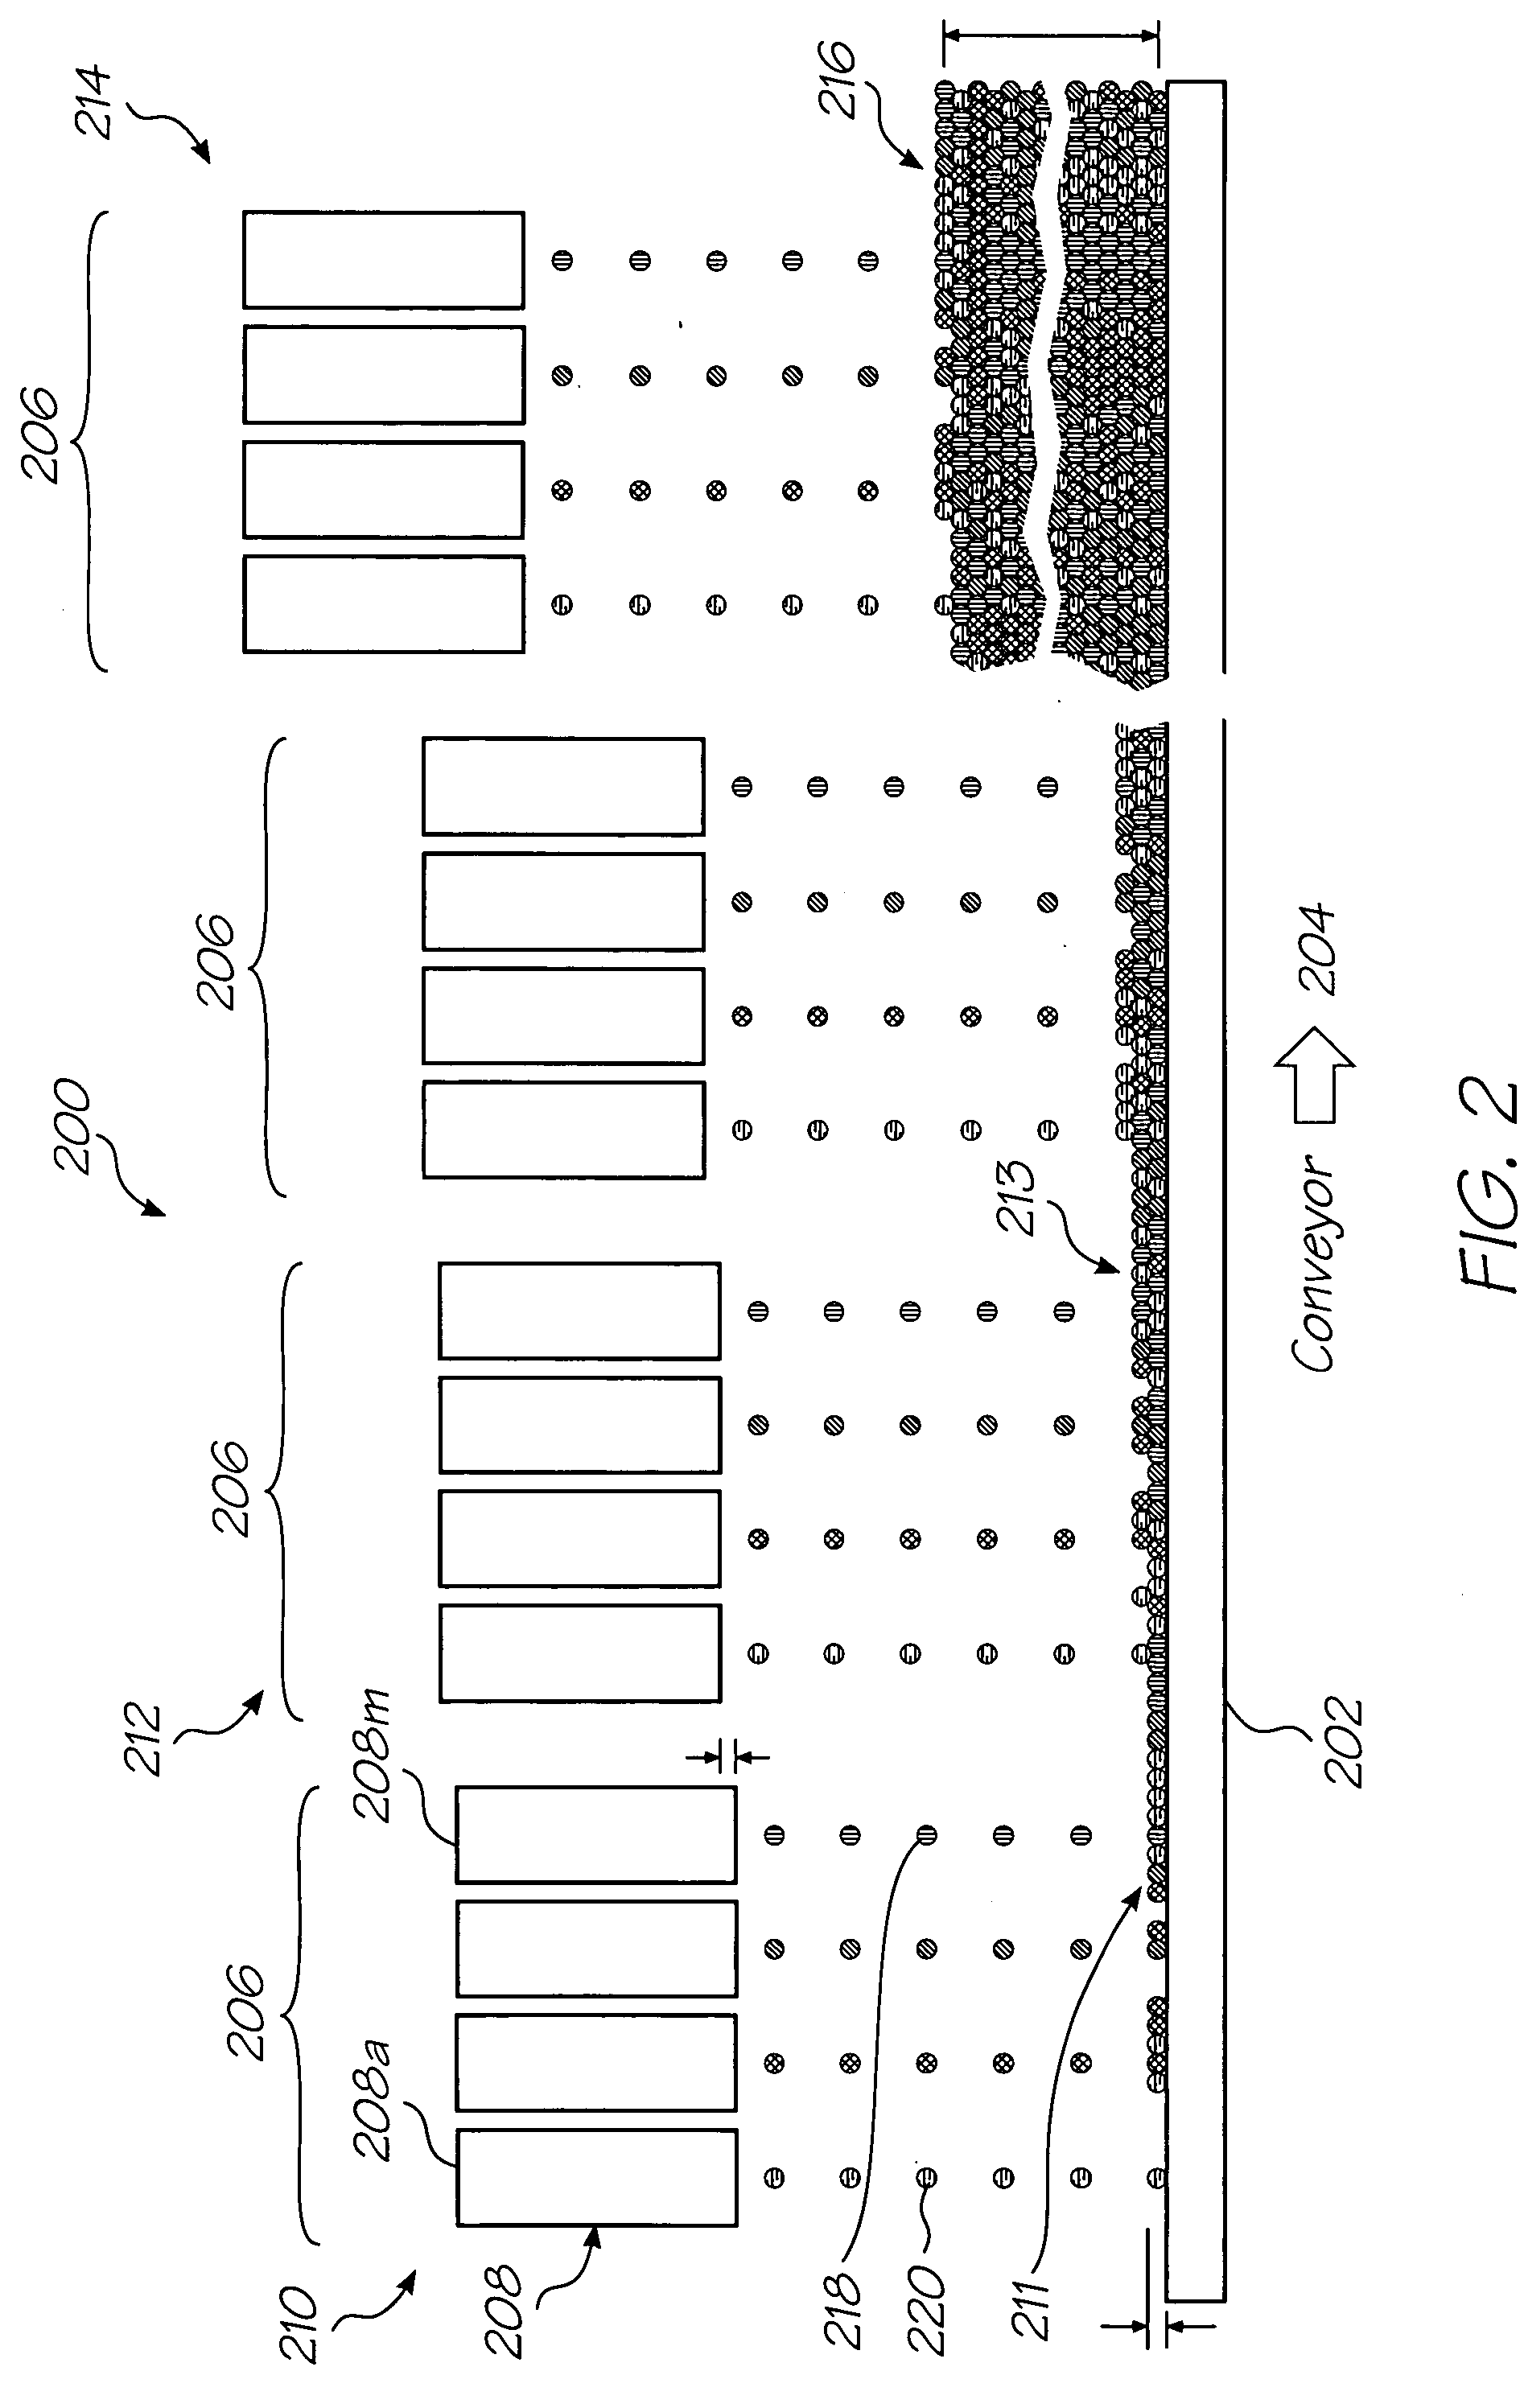 Dynamically configured 3-d object creation system